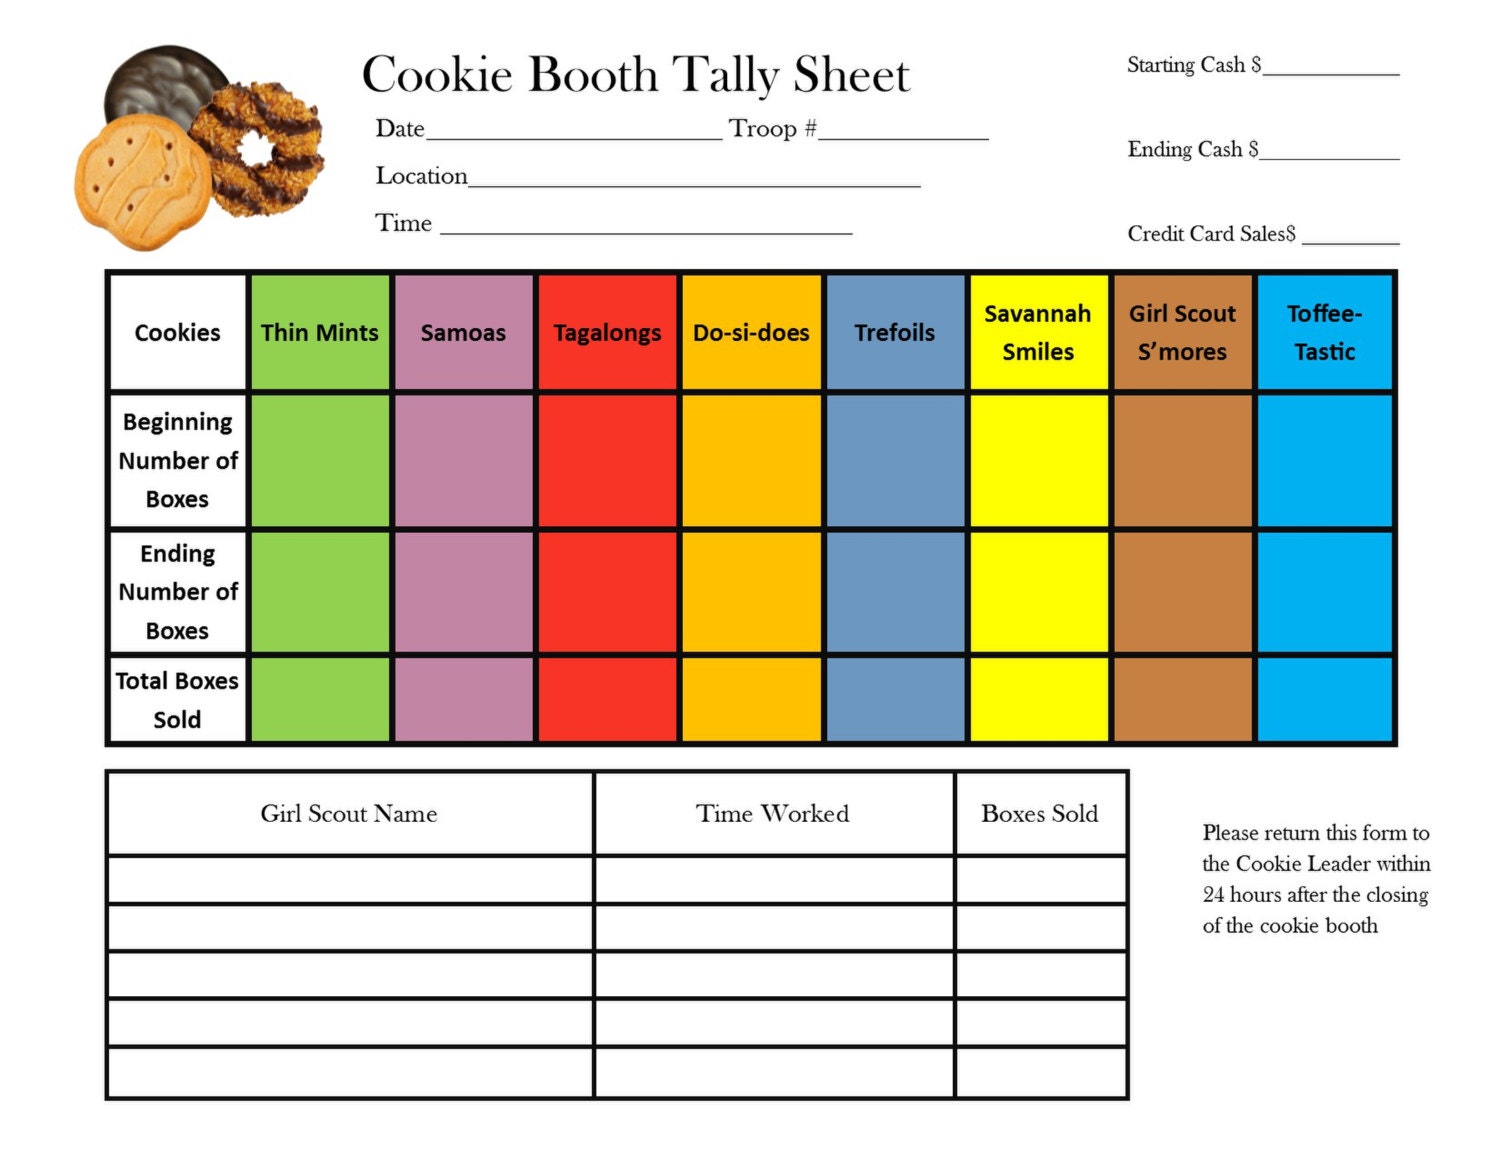 girl-scout-cookie-booth-tally-sheet